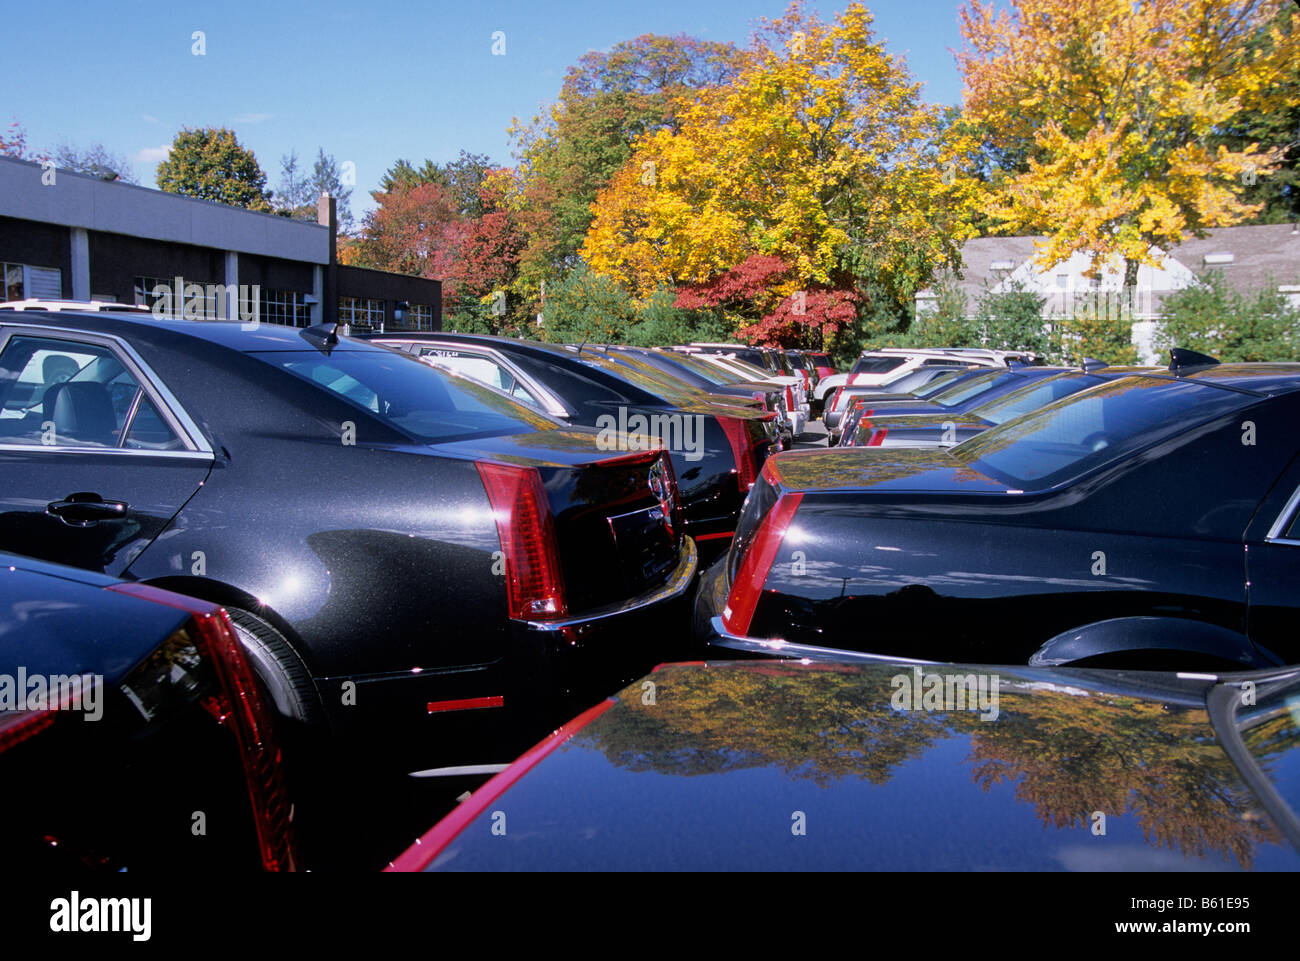 Used car dealer. Used auto lot in Connecticut, USA. Second hand automobiles parked for sale. Second hand cars.  Autumn foliage in New England Stock Photo